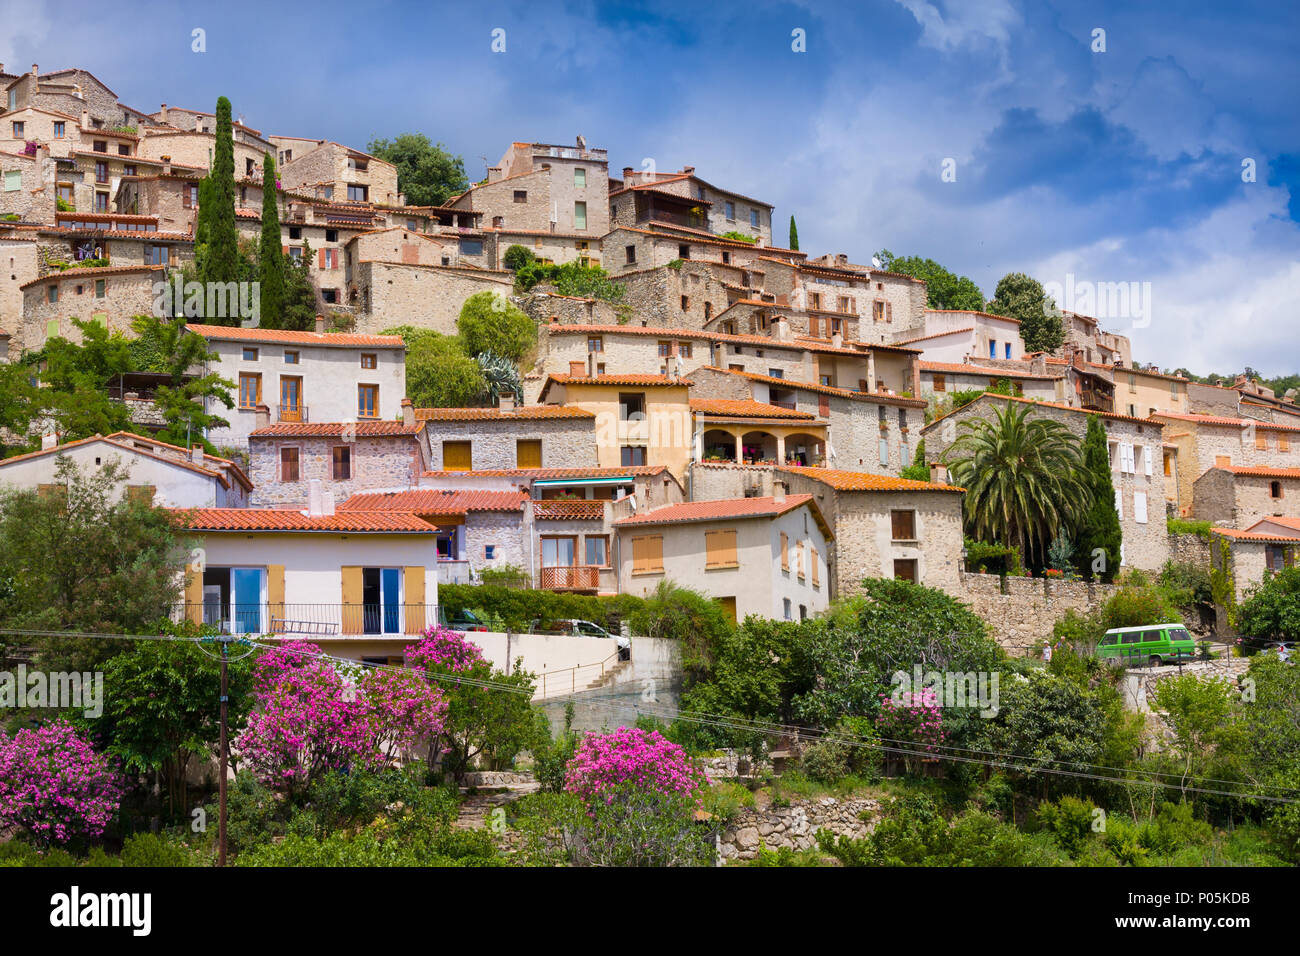 View of village of Eus in Pyrenees-Orientales, Languedoc-Roussillon. Eus is listed as one of the 100 most beautiful villages in France Stock Photo